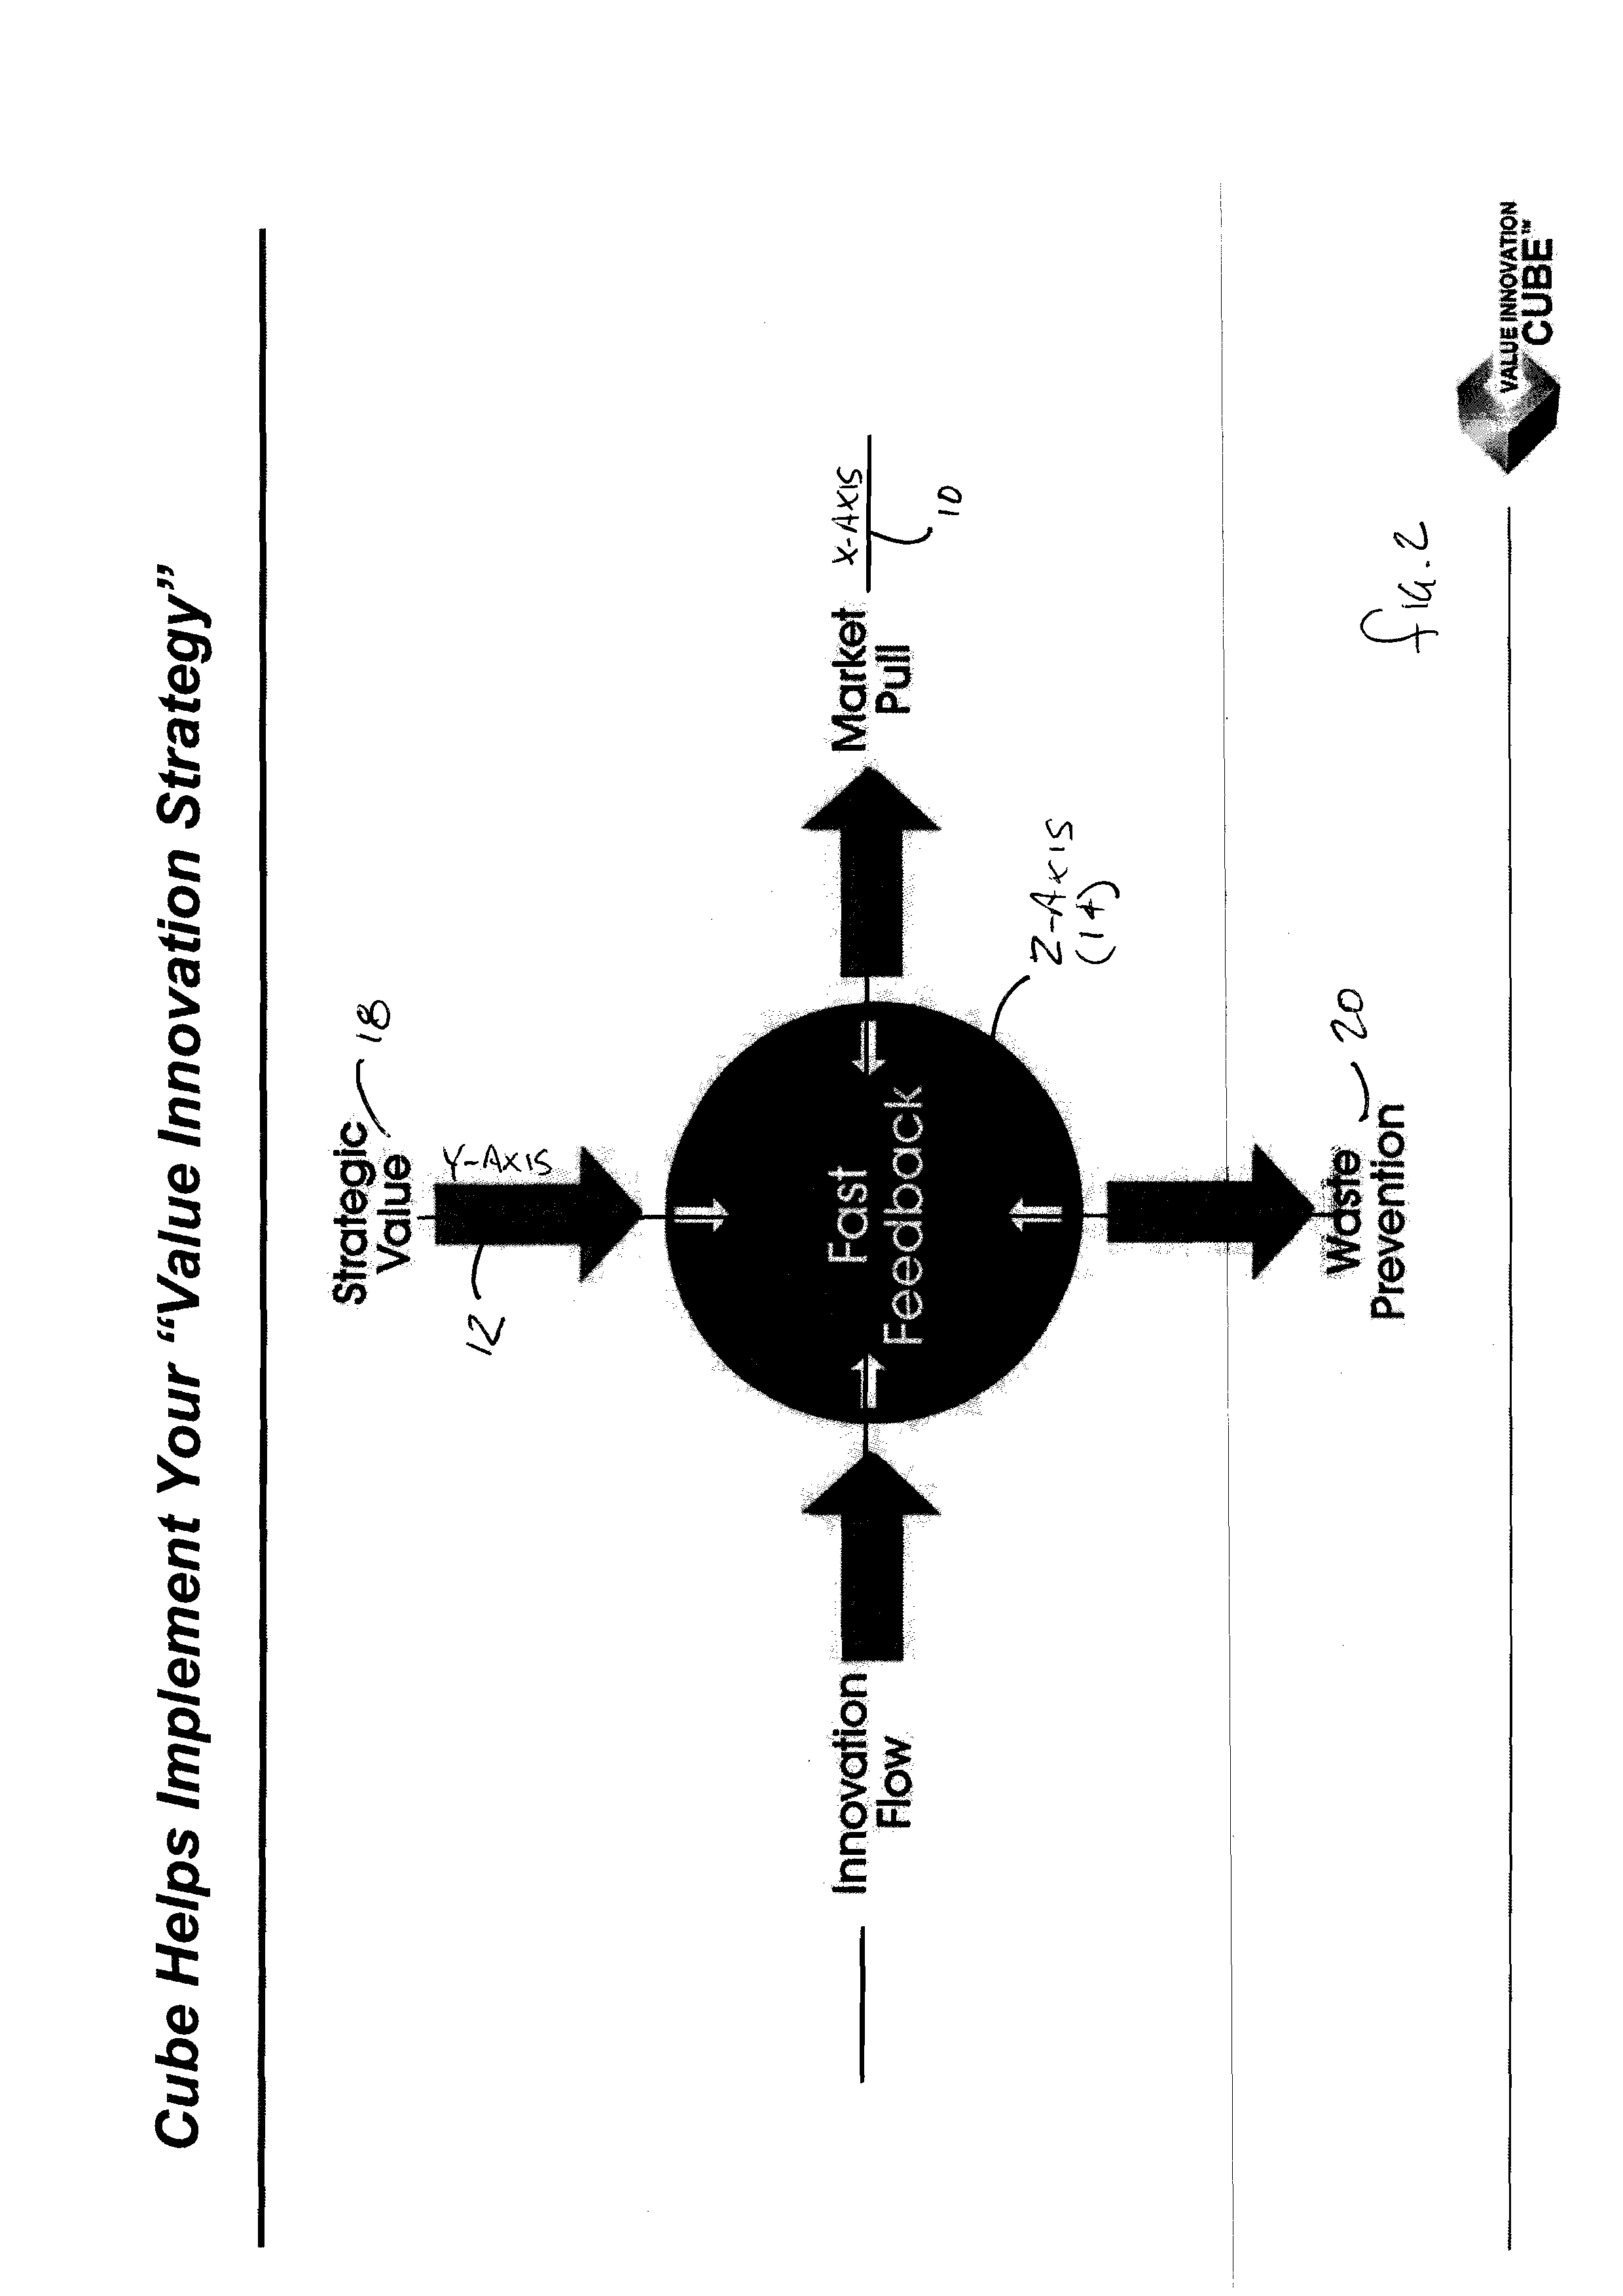 Method and system for framing and evaluating a decision making process